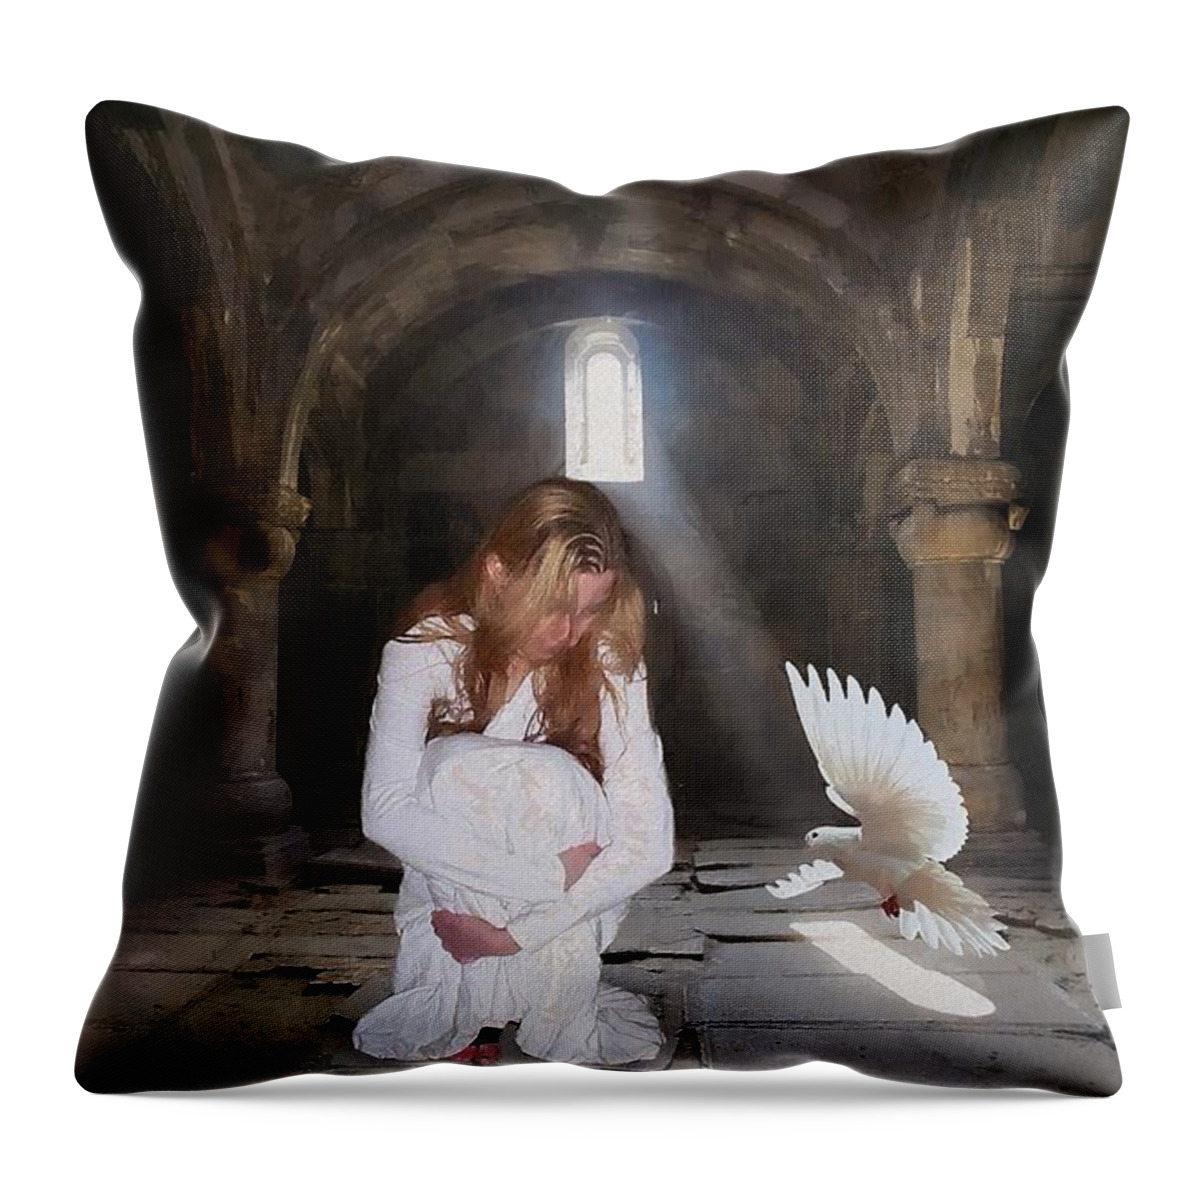 Woman Throw Pillow featuring the digital art There is always hope by Gun Legler